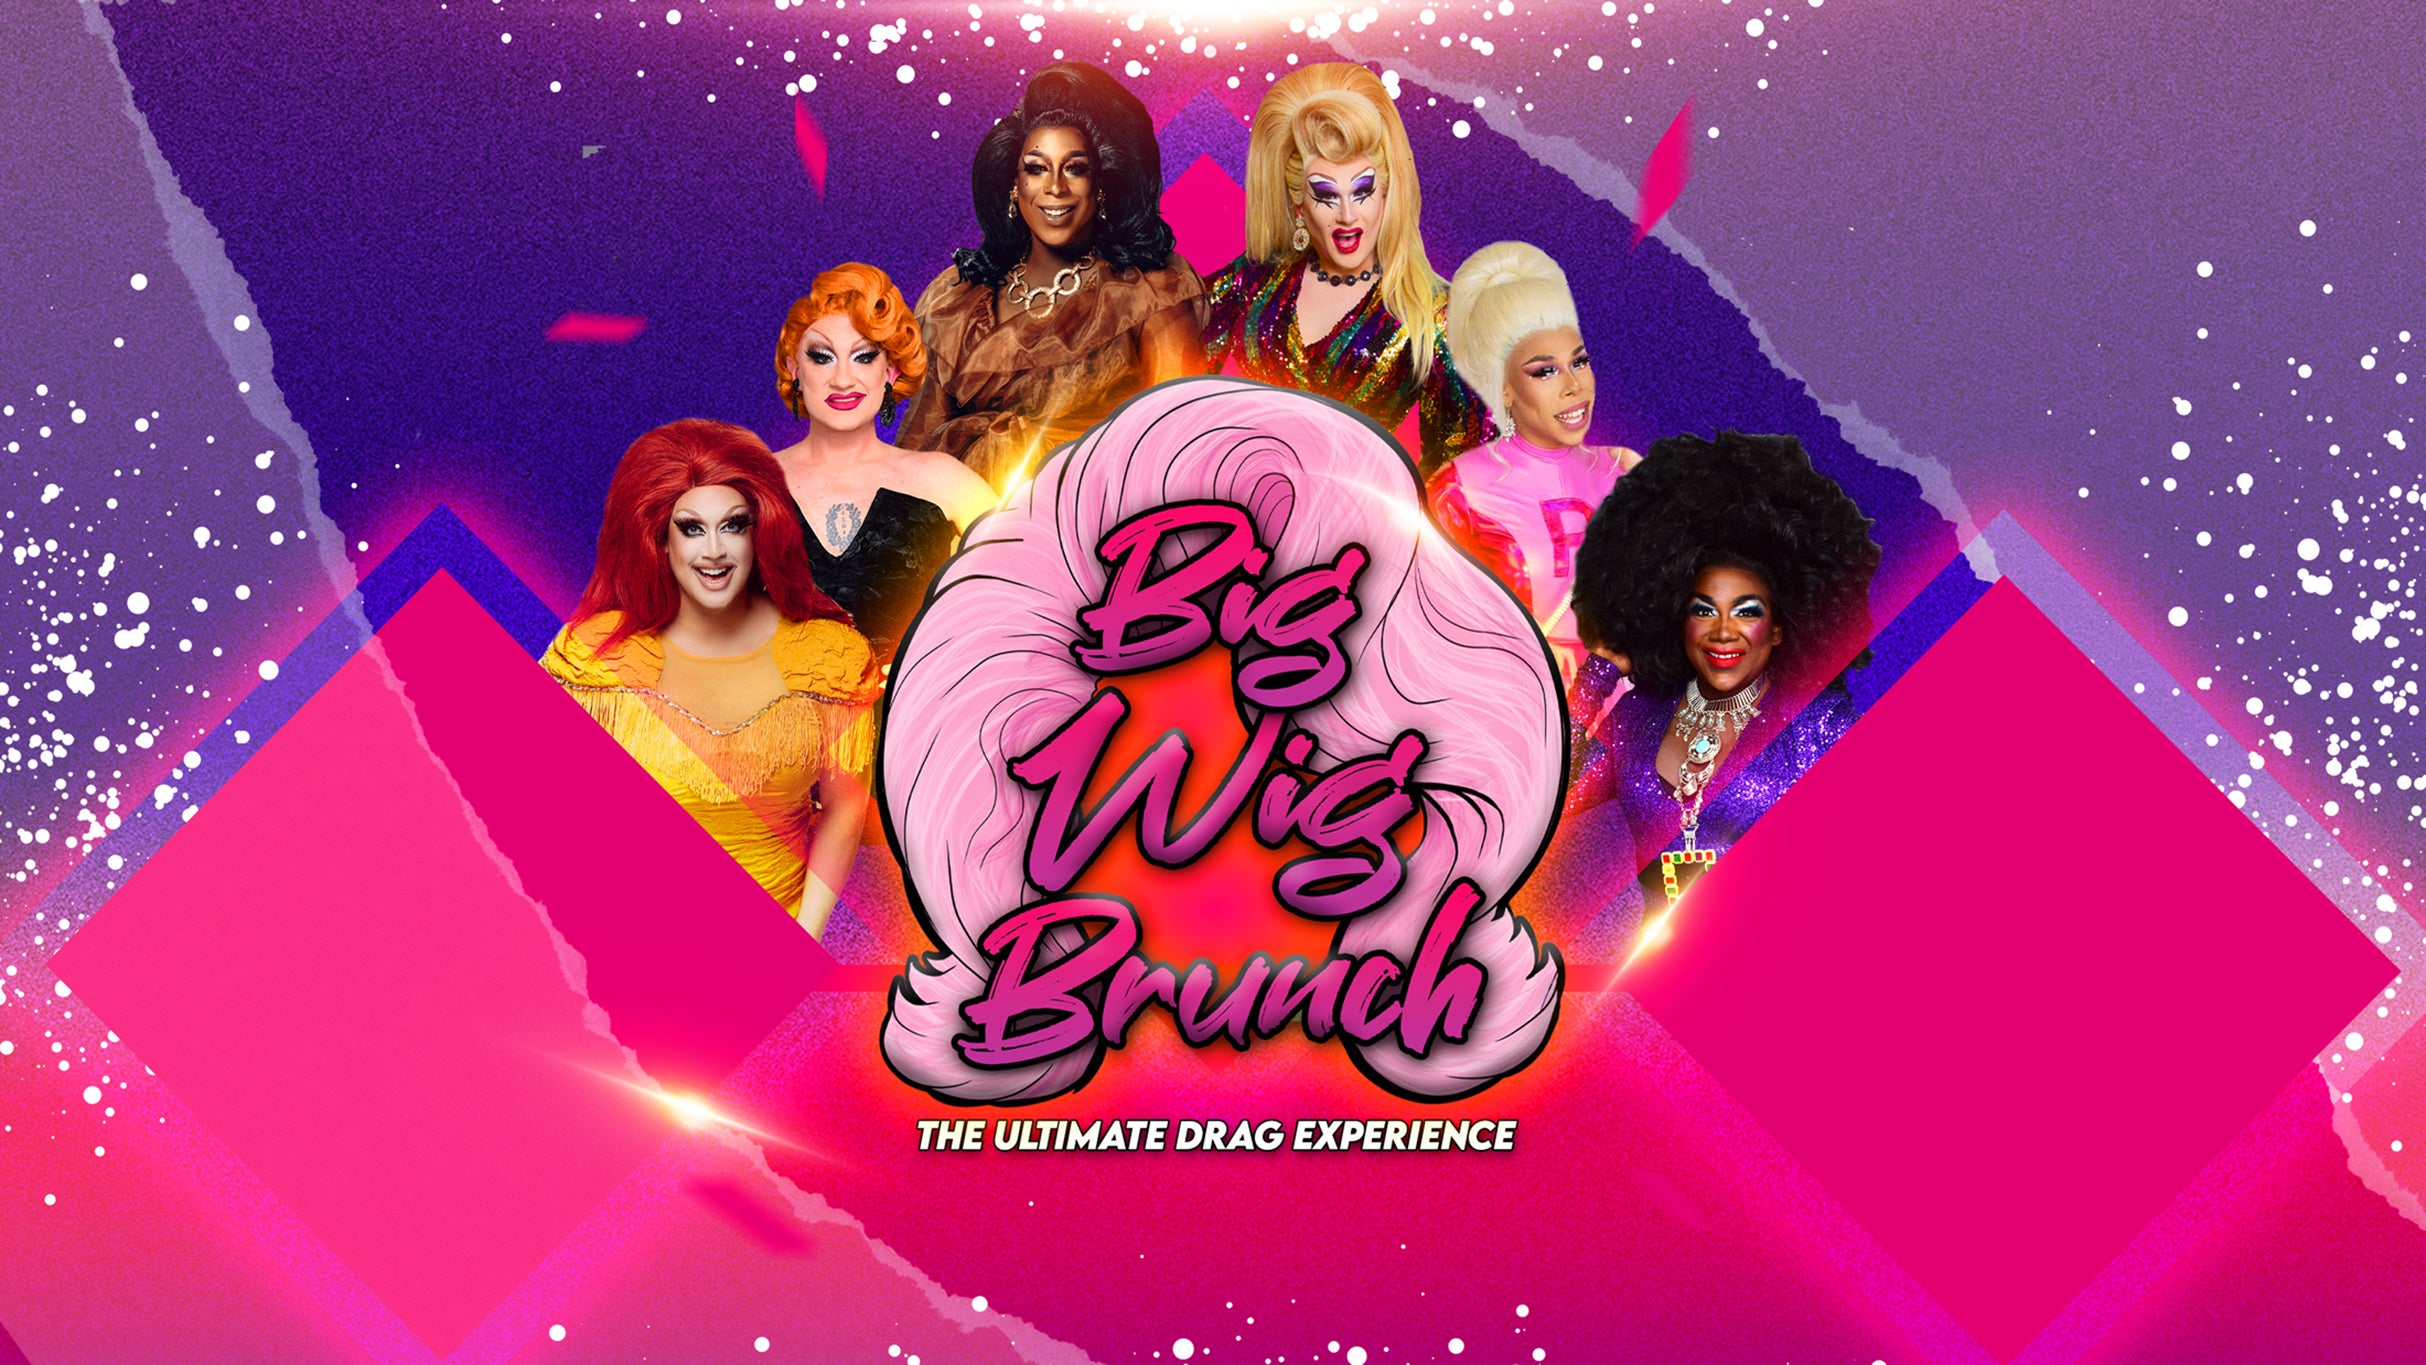 Big Wig Disney Brunch: The Ultimate Drag Experience